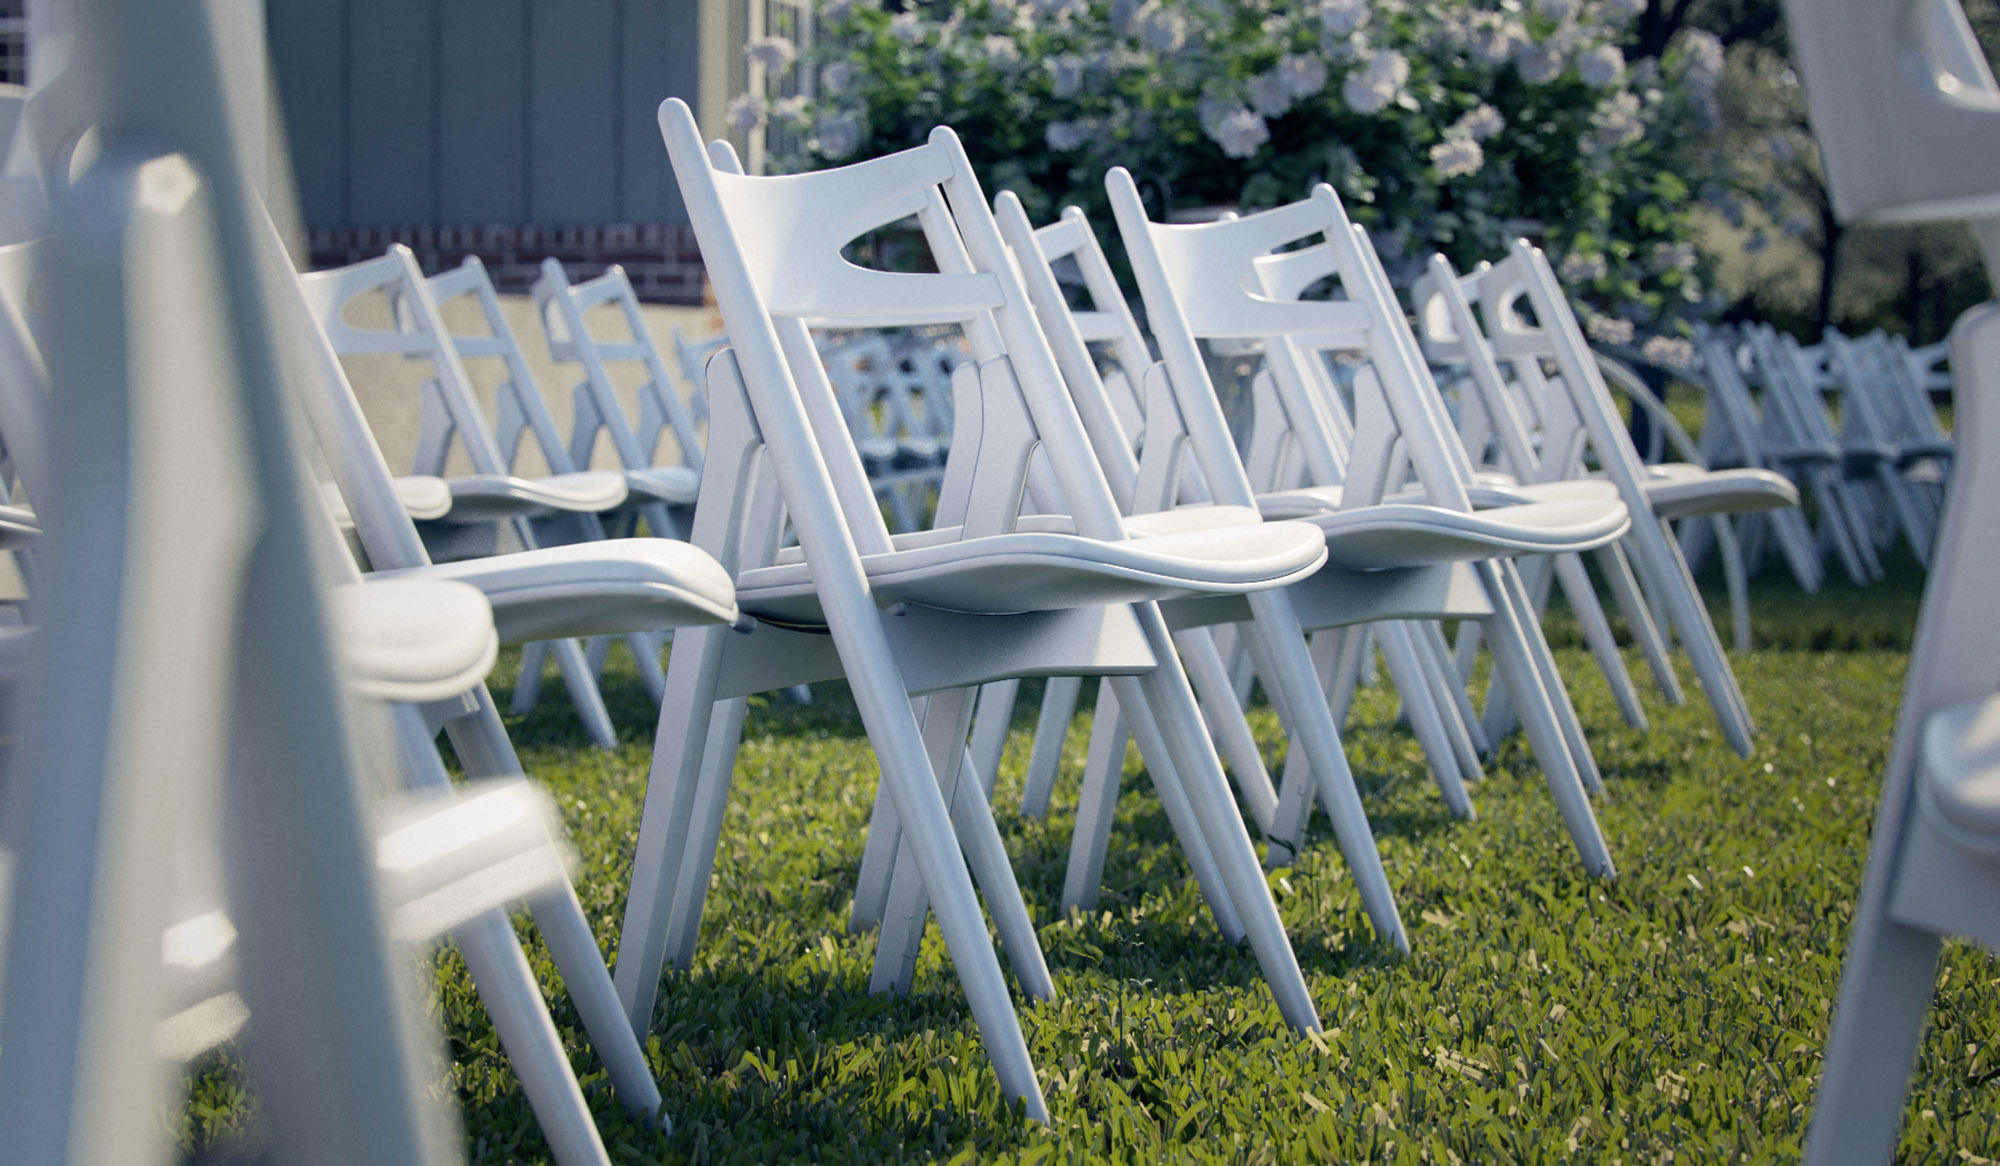 Tight image of exterior seating for weddings or corporate events.